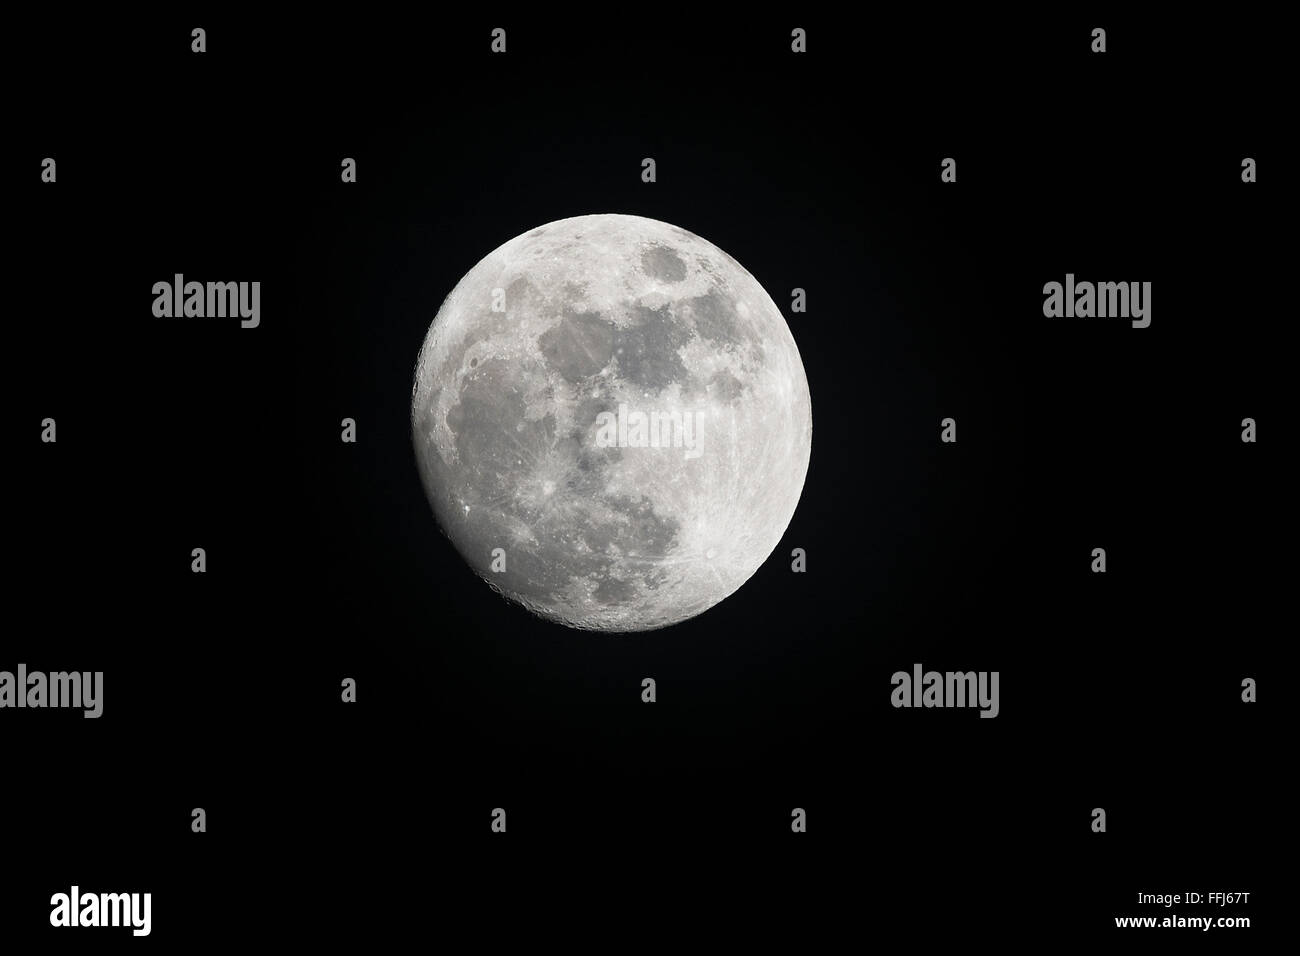 Image of a full moon shot during the evening shows the moonlight highlighting features of the planet. Stock Photo